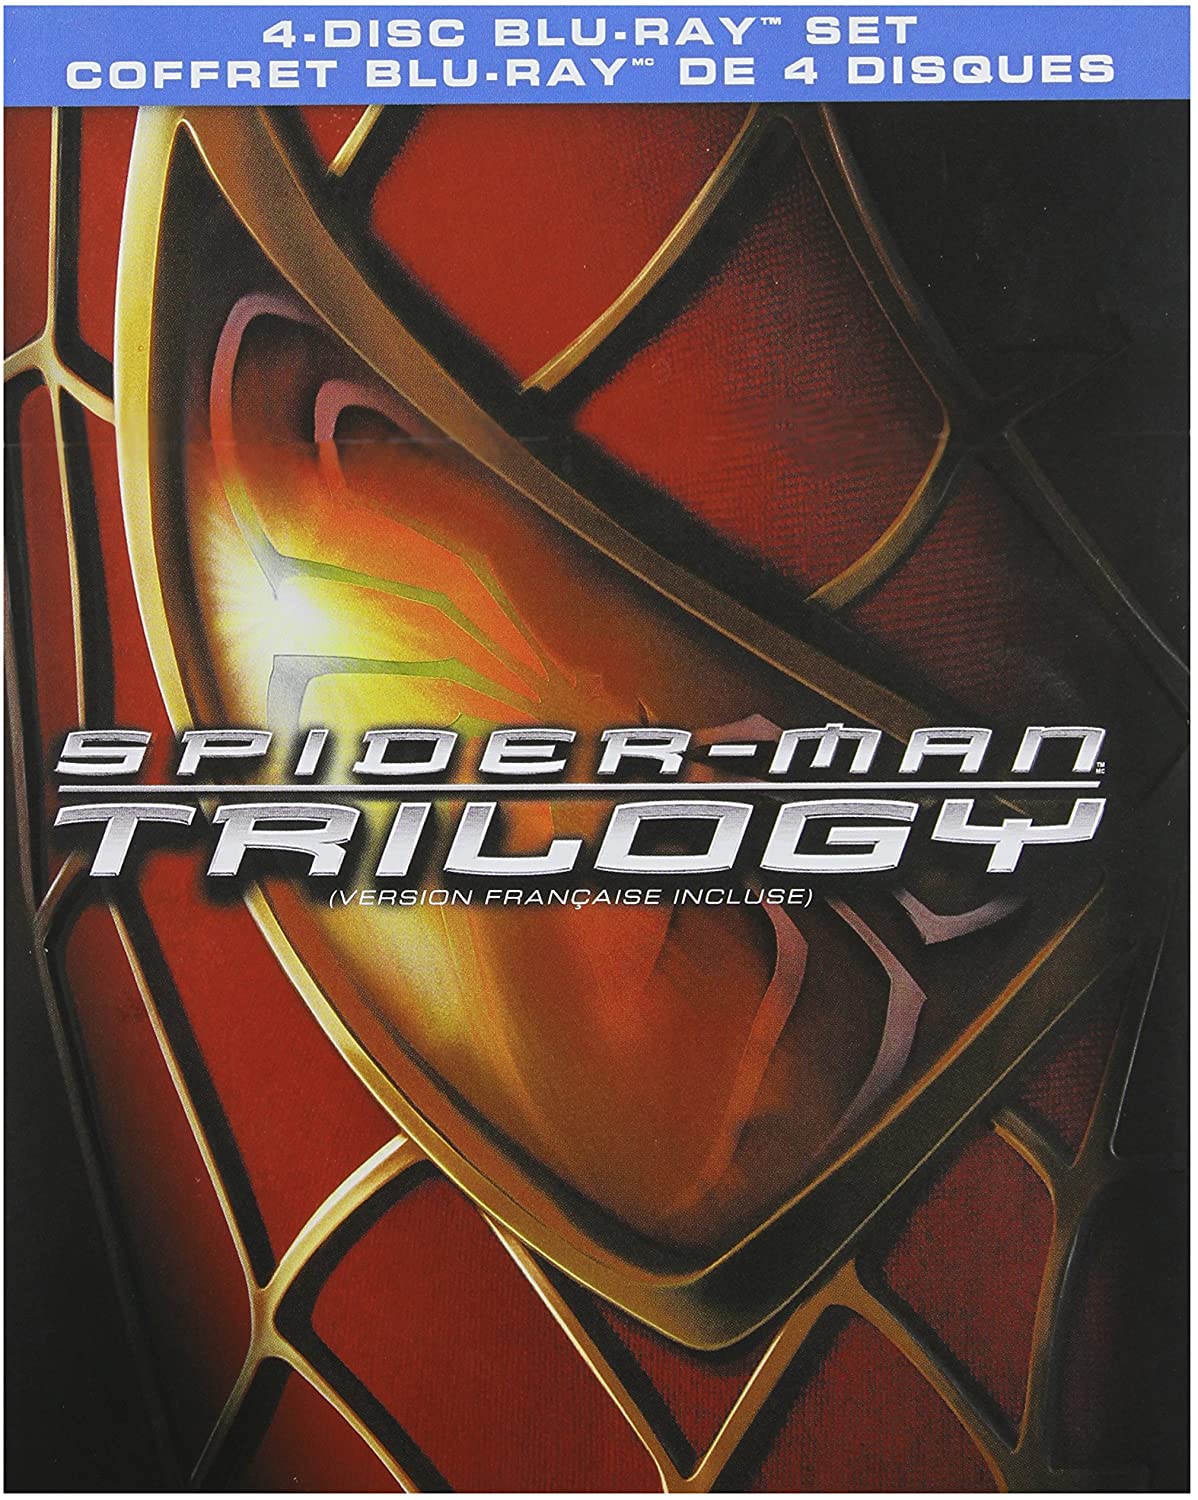  Spider-Man 3 [Blu-ray] : Tobey Maguire, Kirsten Dunst, James  Franco, Thomas Haden Church, Topher Grace, Bryce Dallas Howard, James  Cromwell, Rosemary Harris, J.K. Simmons, Bill Pope, Christopher Young, Sam  Raimi: Movies